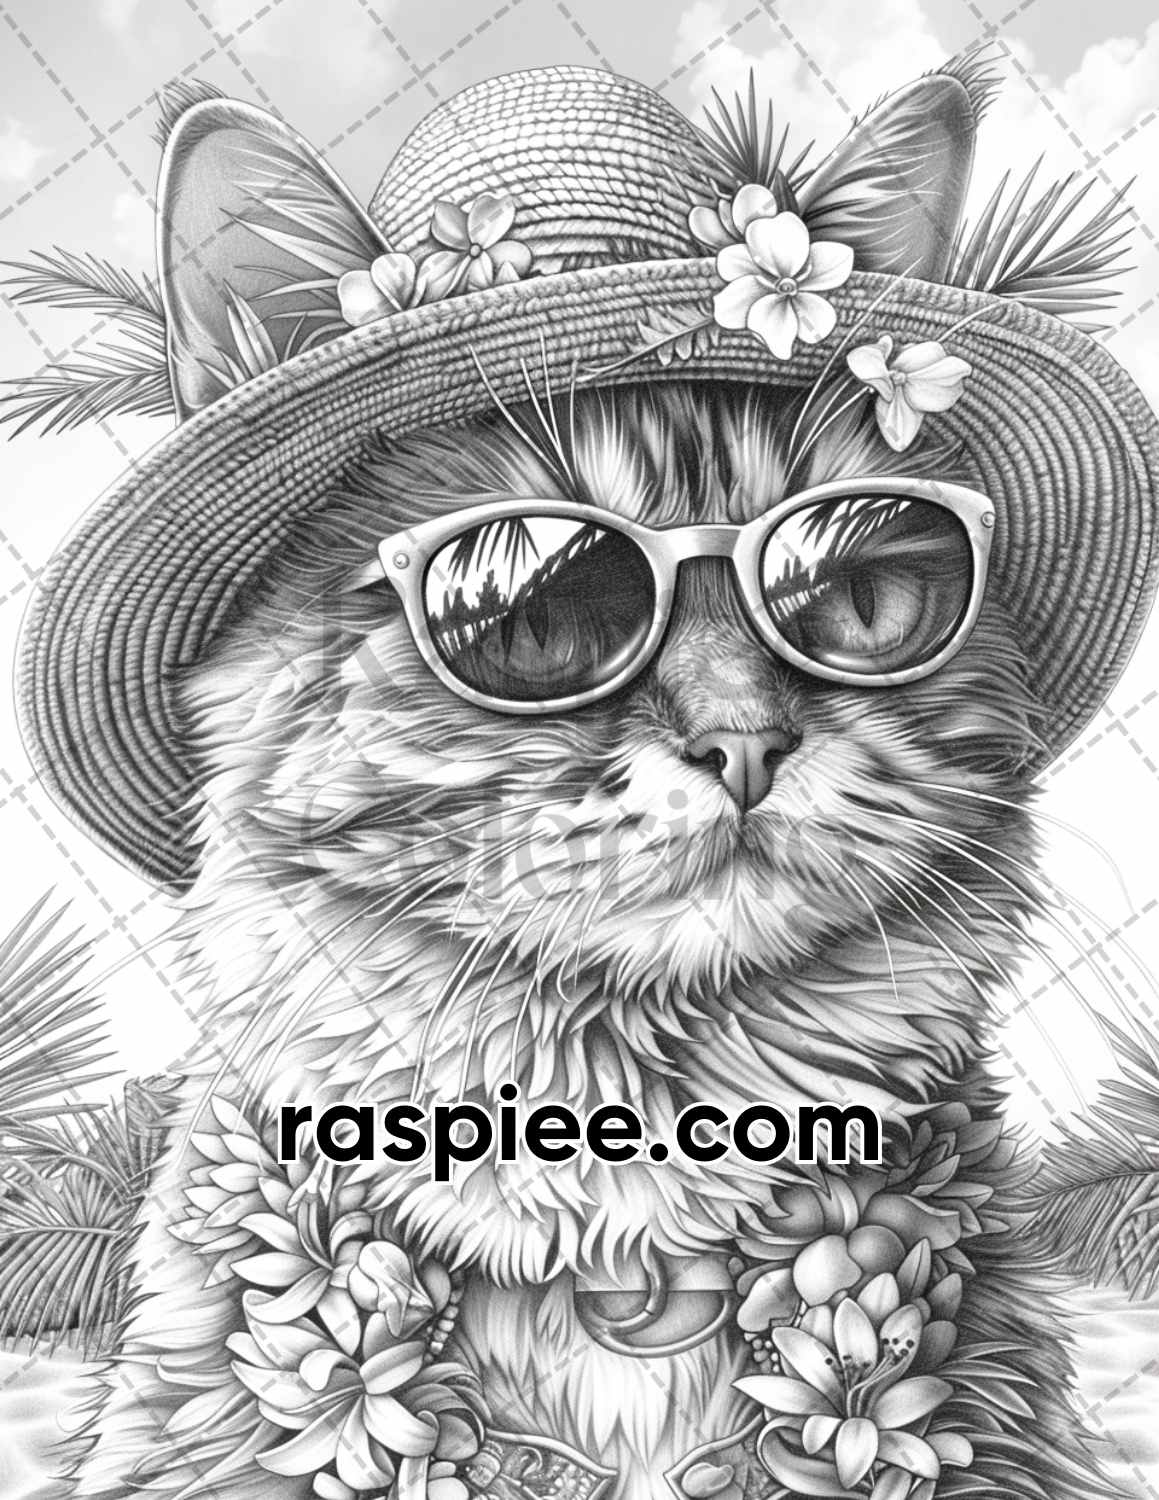 adult coloring pages, adult coloring sheets, adult coloring book pdf, adult coloring book printable, grayscale coloring pages, grayscale coloring books, cat coloring pages for adults, cat coloring book, grayscale illustration, summer coloring pages, animal coloring pages